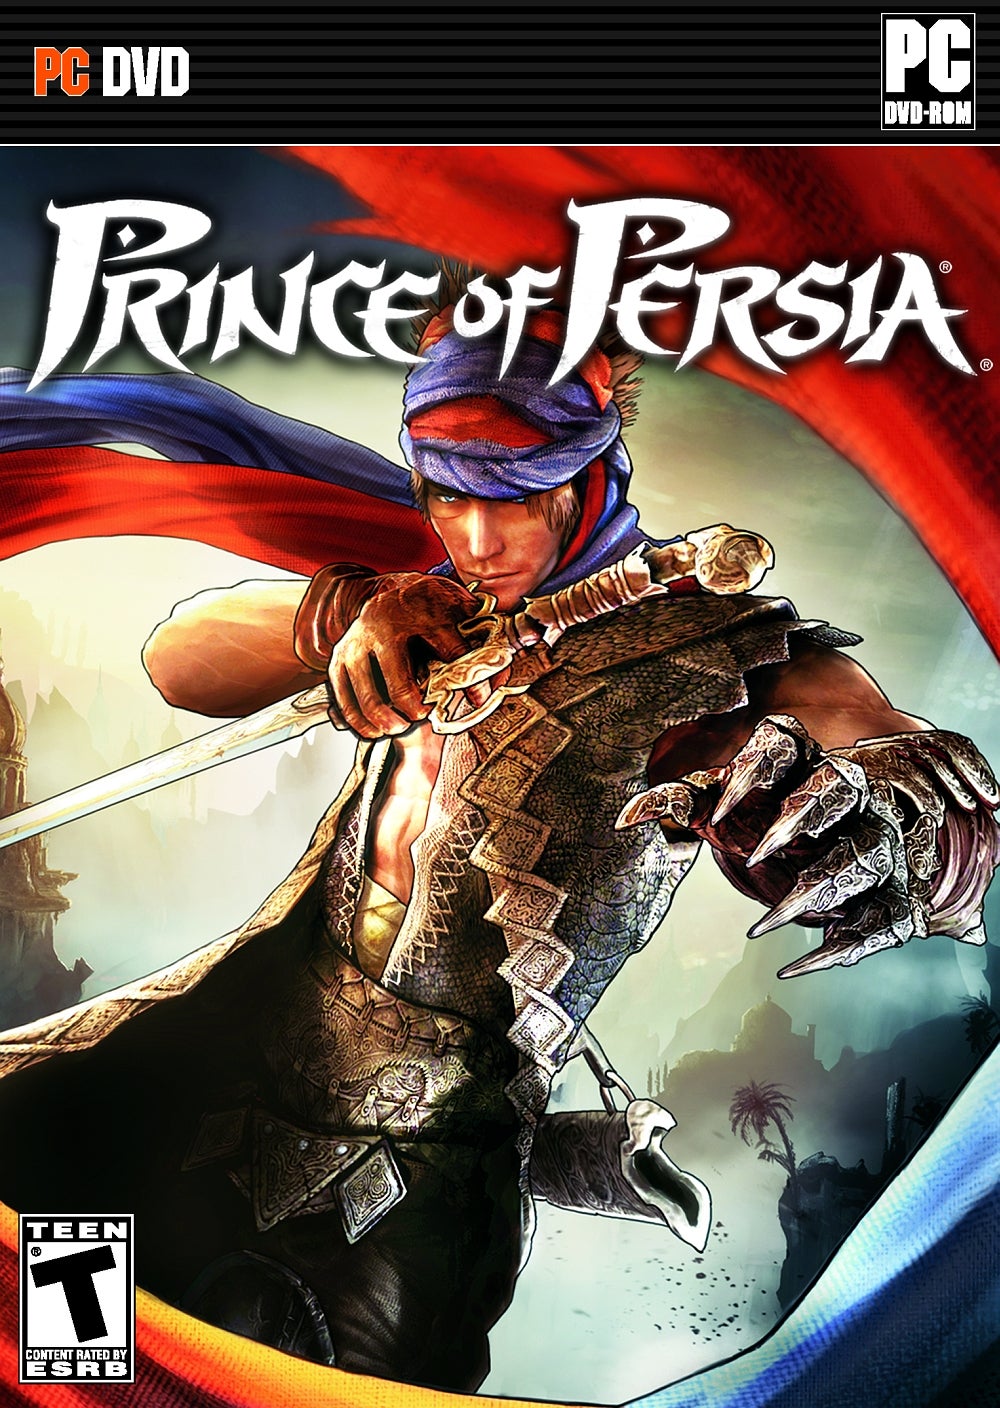 prince of persia 2008 pc patch free